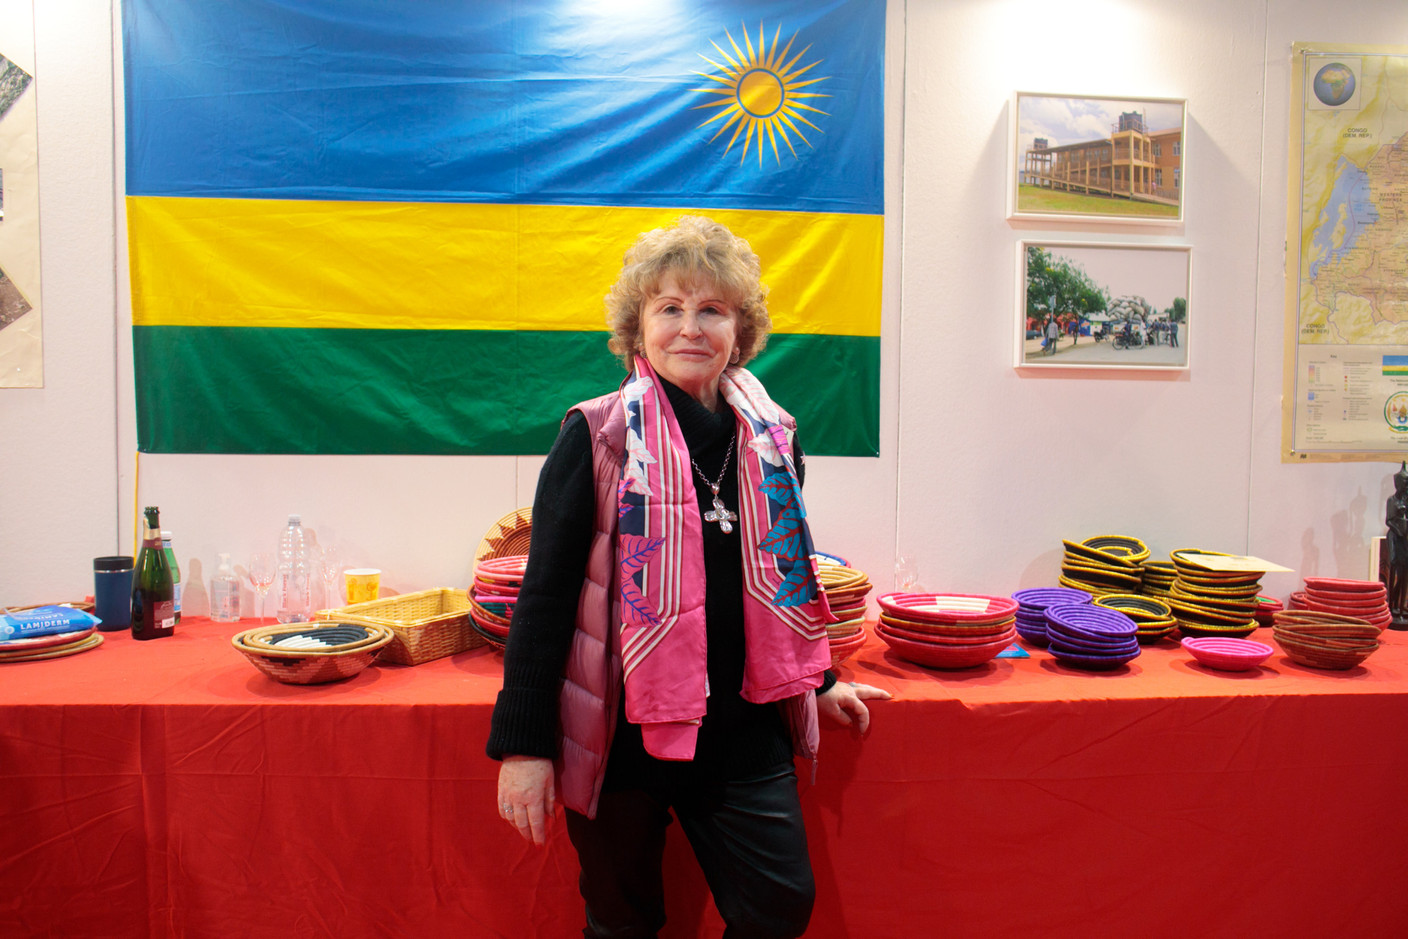 Head of Rwanda stand Luisella Moreschi mentioned that people return every year. The stand’s products included coffee and tea, as well as quality handmade baskets made by Rwandan women. Matic Zorman / Maison Moderne